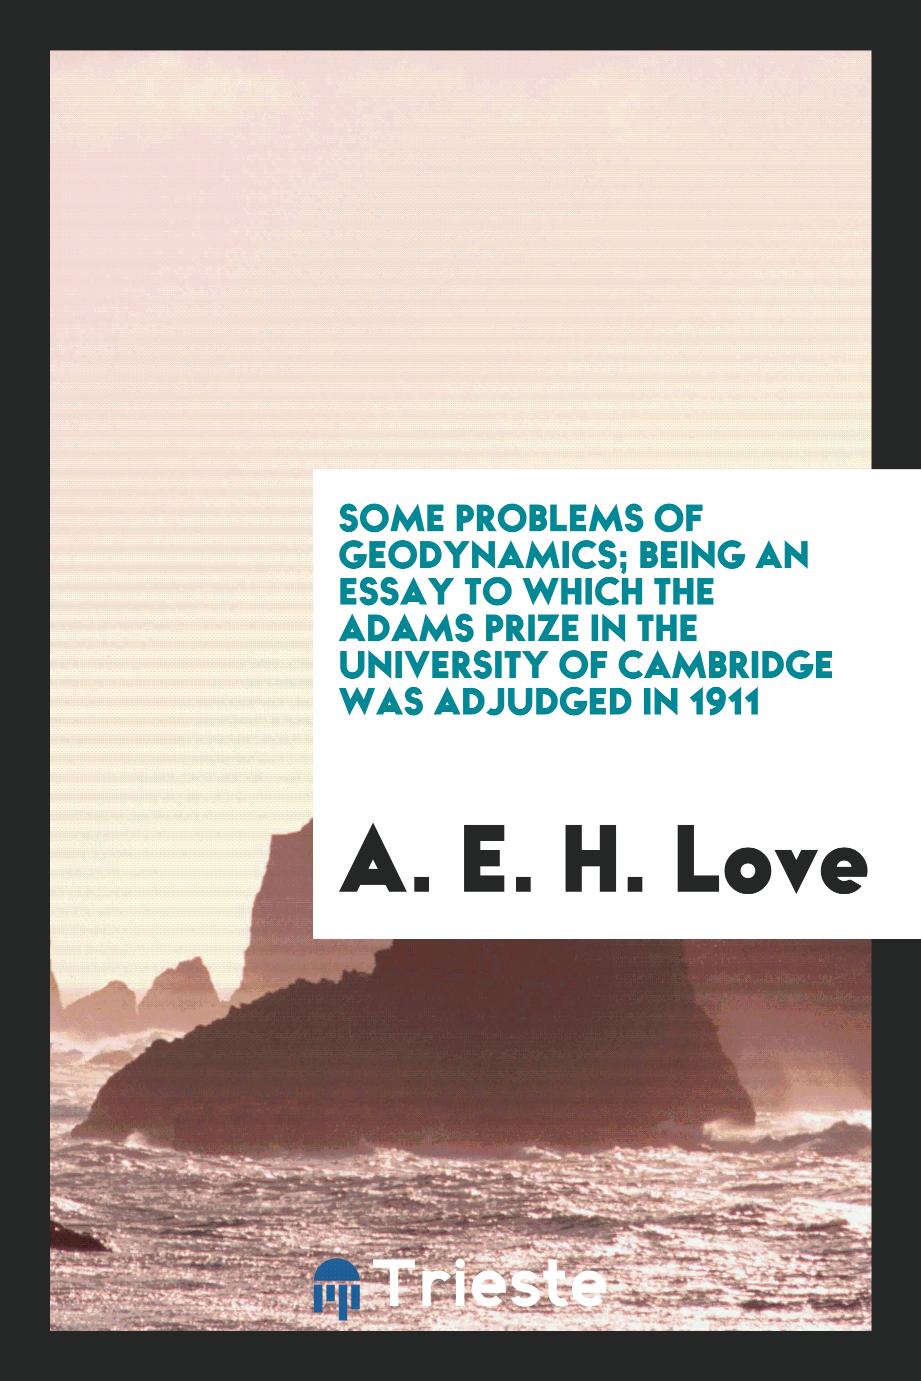 Some problems of geodynamics; being an essay to which the Adams prize in the University of Cambridge was adjudged in 1911